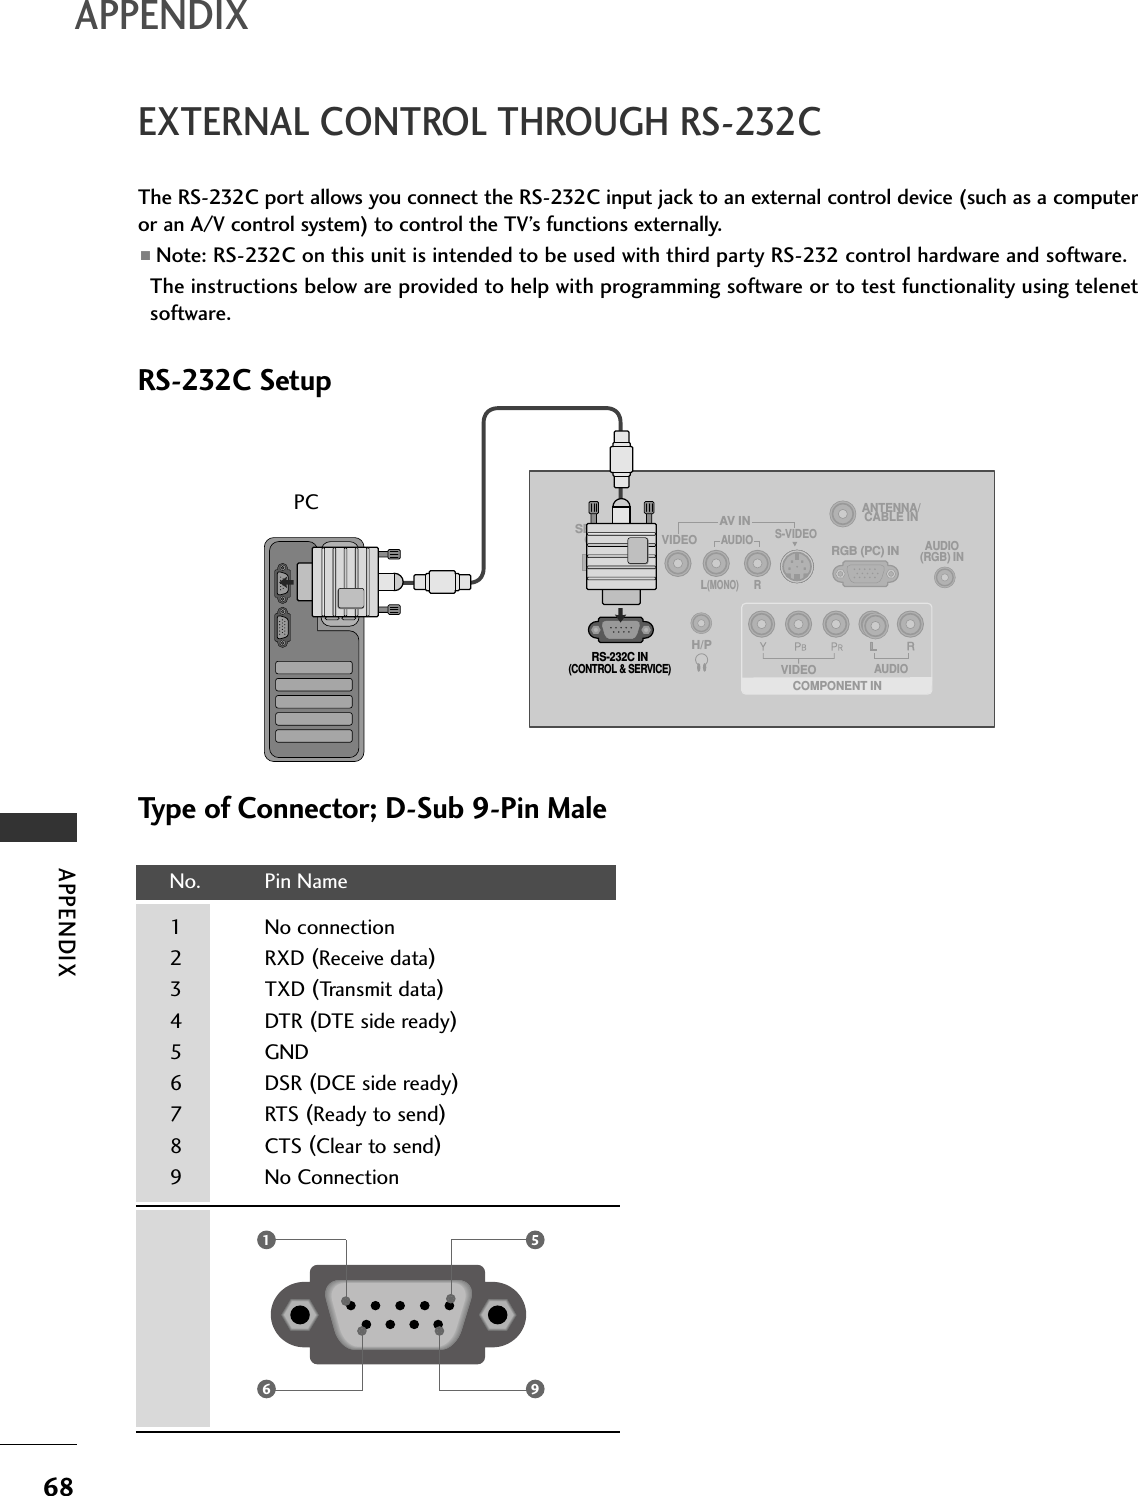 APPENDIX68EXTERNAL CONTROL THROUGH RS-232CAPPENDIXRS-232C SetupThe RS-232C port allows you connect the RS-232C input jack to an external control device (such as a computeror an A/V control system) to control the TV’s functions externally.■Note: RS-232C on this unit is intended to be used with third party RS-232 control hardware and software.The instructions below are provided to help with programming software or to test functionality using telenetsoftware.VIDEOAUDIOL(MONO)RS-VIDEOANTENNA/CABLE INRS-232C IN(CONTROL &amp; SERVICE)RGB (PC) INAUDIO(RGB) INSERVICEONLYVIDEOAUDIOCOMPONENT INAV INH/PType of Connector; D-Sub 9-Pin MaleNo.  Pin Name1  No connection2 RXD (Receive data)3 TXD (Transmit data)4 DTR (DTE side ready)5GND6 DSR (DCE side ready)7 RTS (Ready to send)8 CTS (Clear to send)9 No Connection1659PC